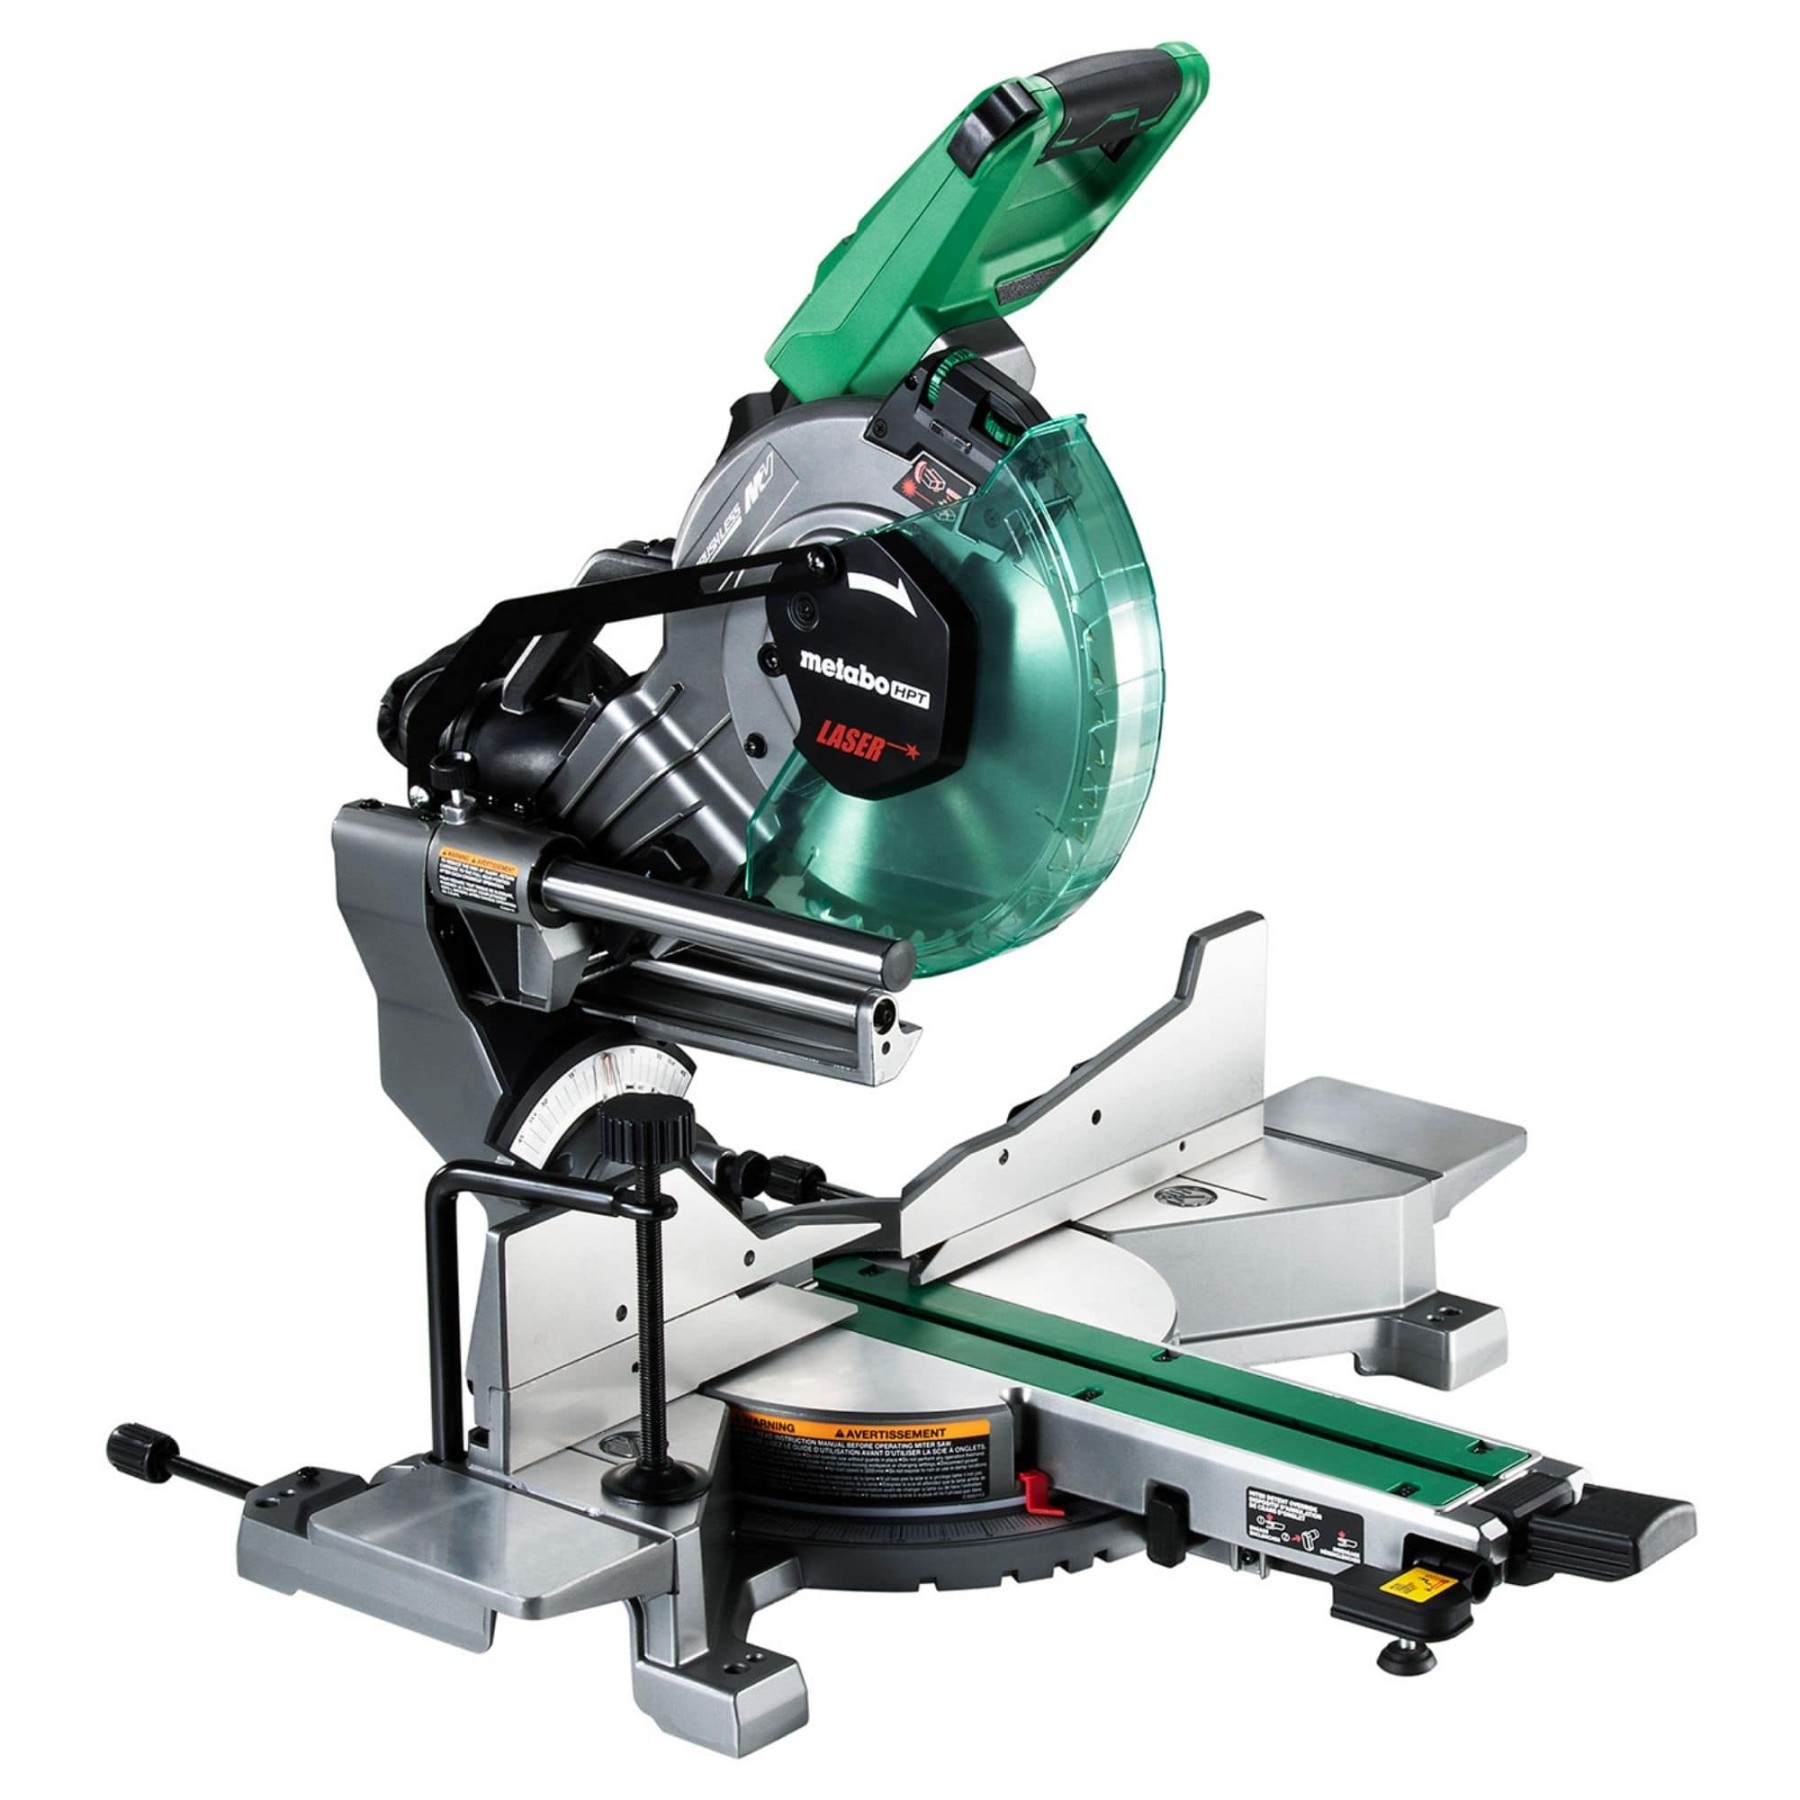 v-multivolt-inch-dual-bevel-sliding-cordless-miter-saw-tool Cutting-Edge Convenience: This Emphasizes The Potential Benefit Of Cordless Miter Saws. picture